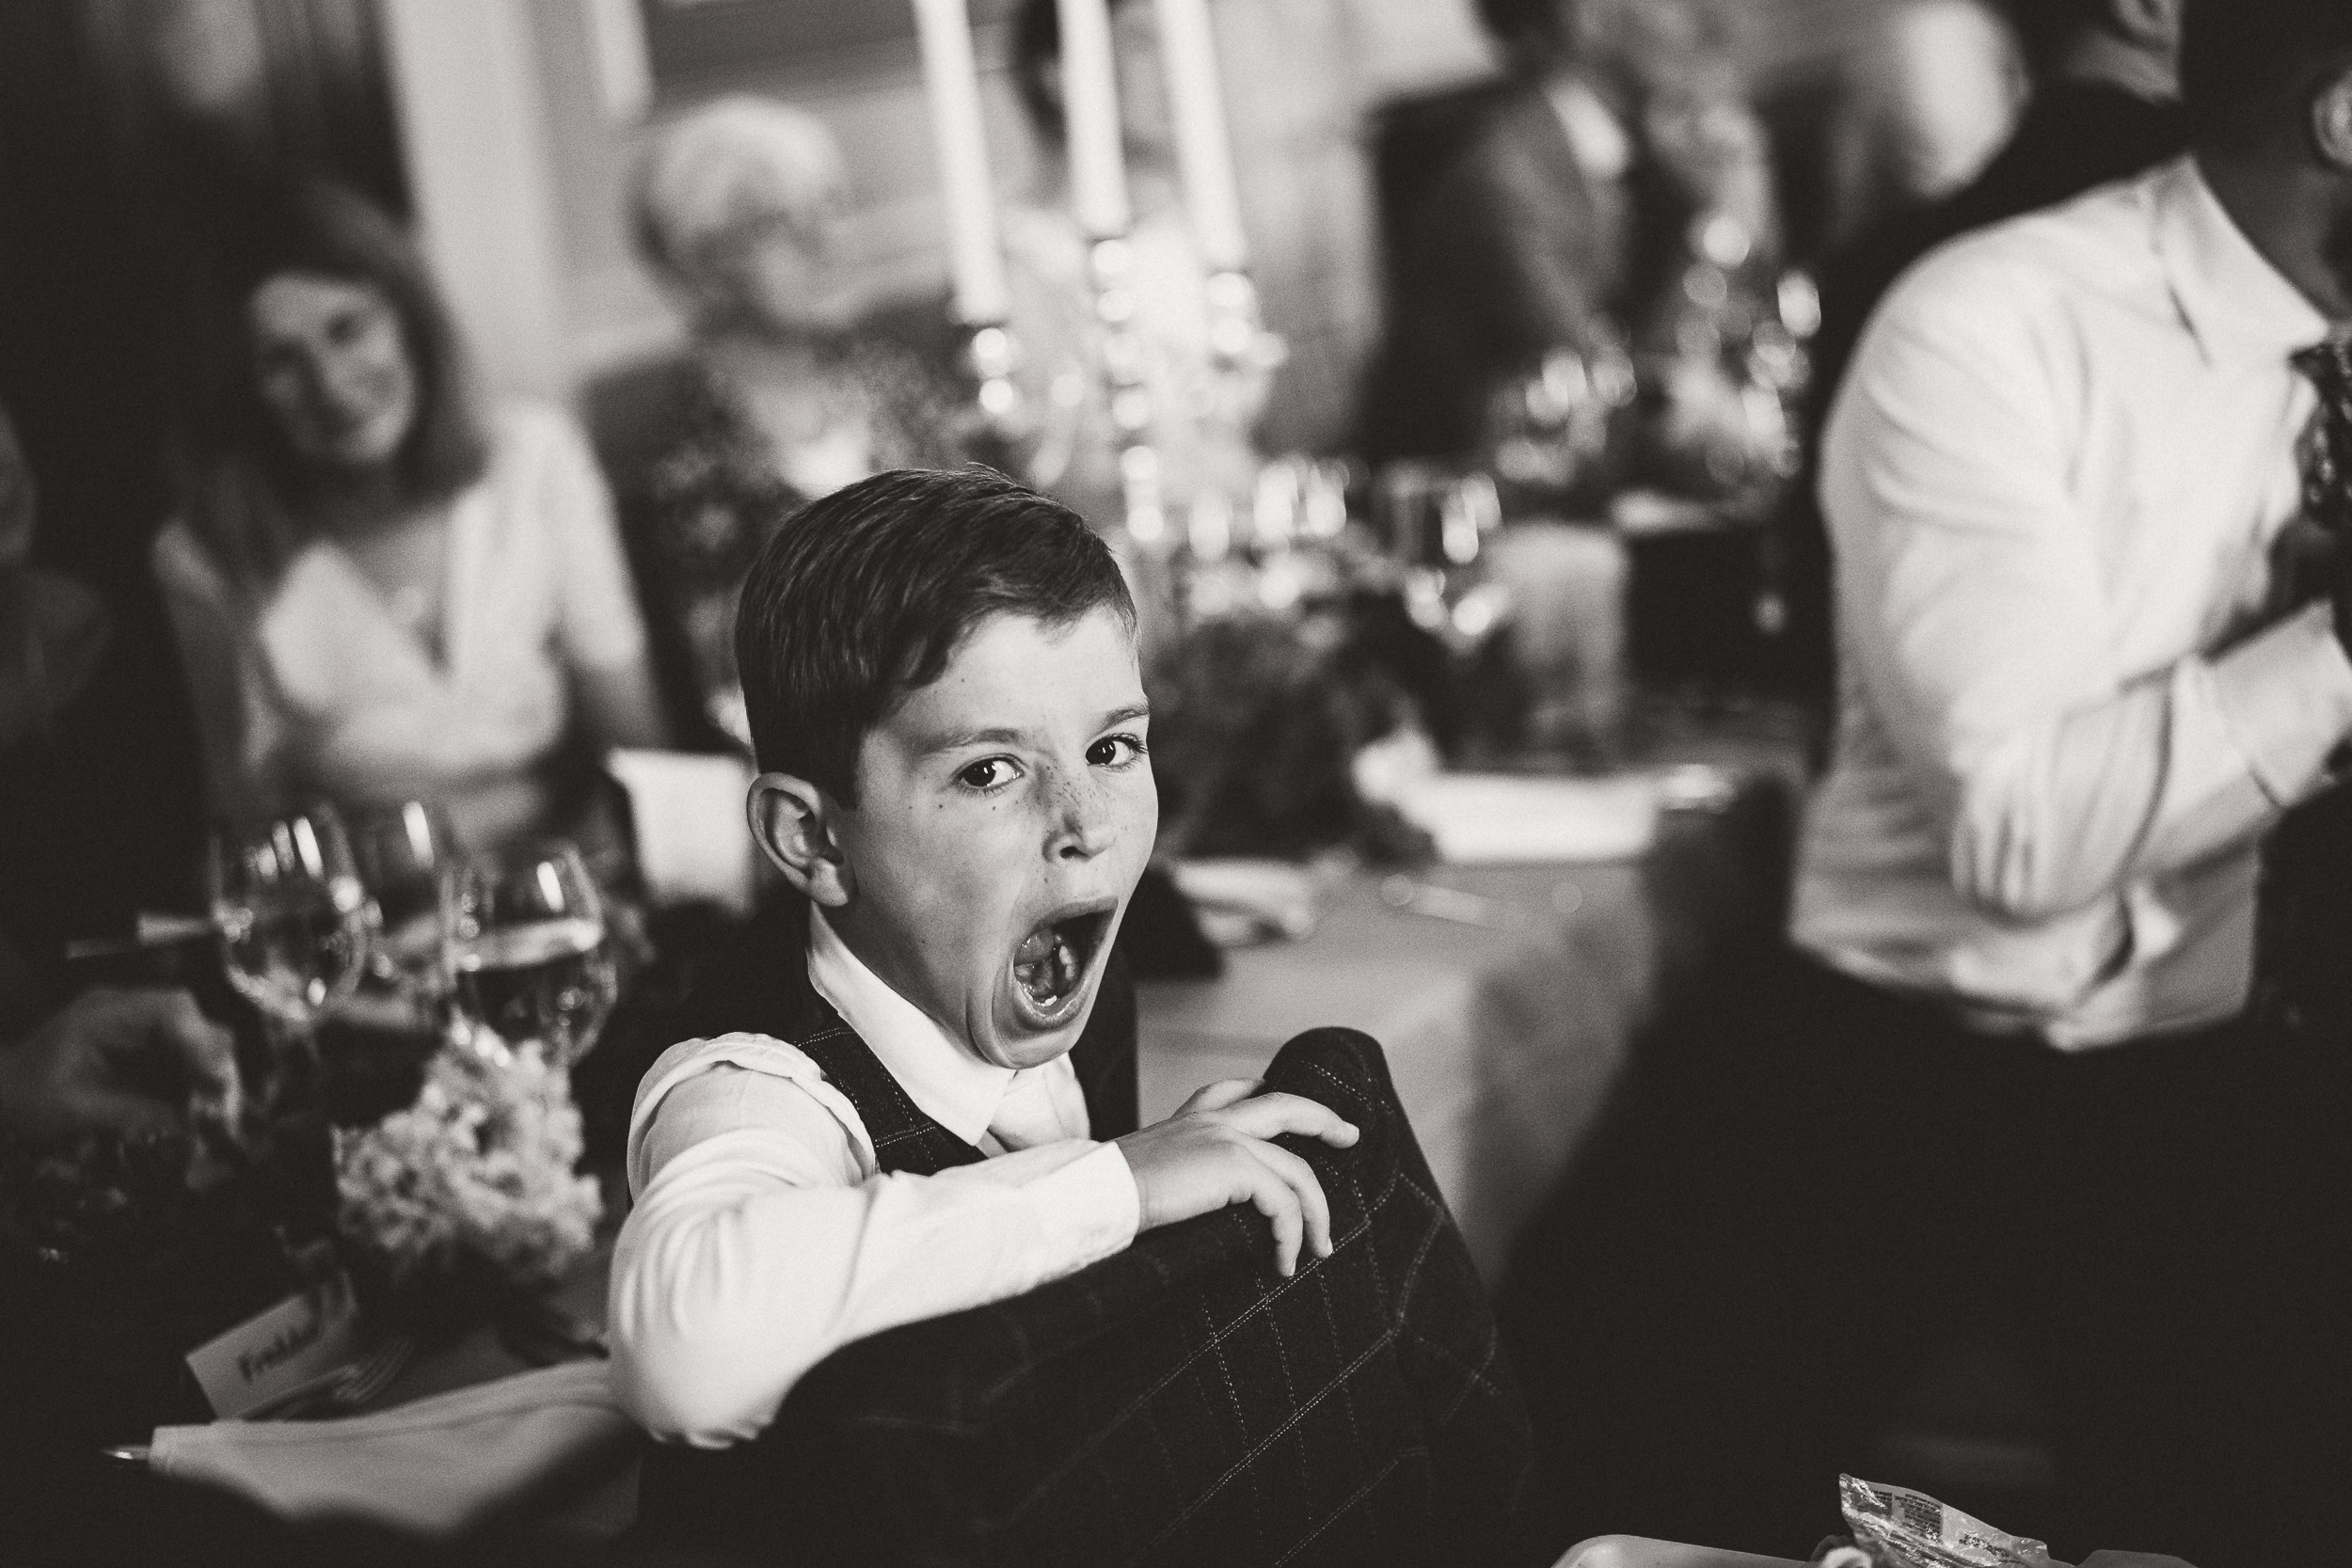 A young boy disrupts a wedding reception with his loud yelling.